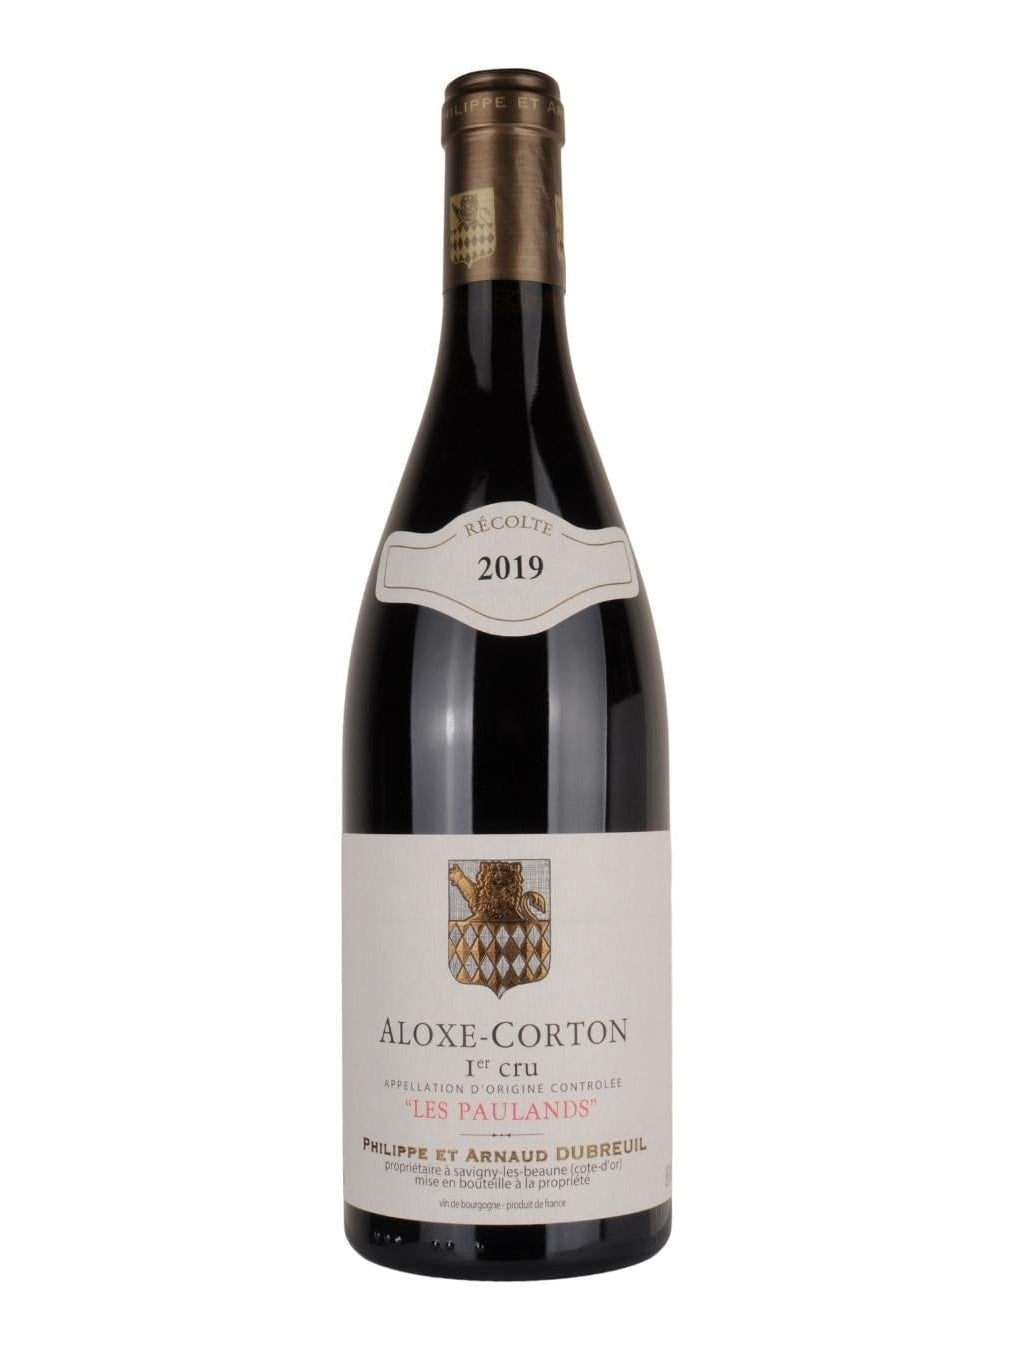 Shop Domaine Philippe et Arnaud Dubreuil Domaine Philippe et Arnaud Dubreuil Aloxe-Corton 1er Cru Les Paulands 2019 online at PENTICTON artisanal French wine store in Hong Kong. Discover other French wines, promotions, workshops and featured offers at pentictonpacific.com 